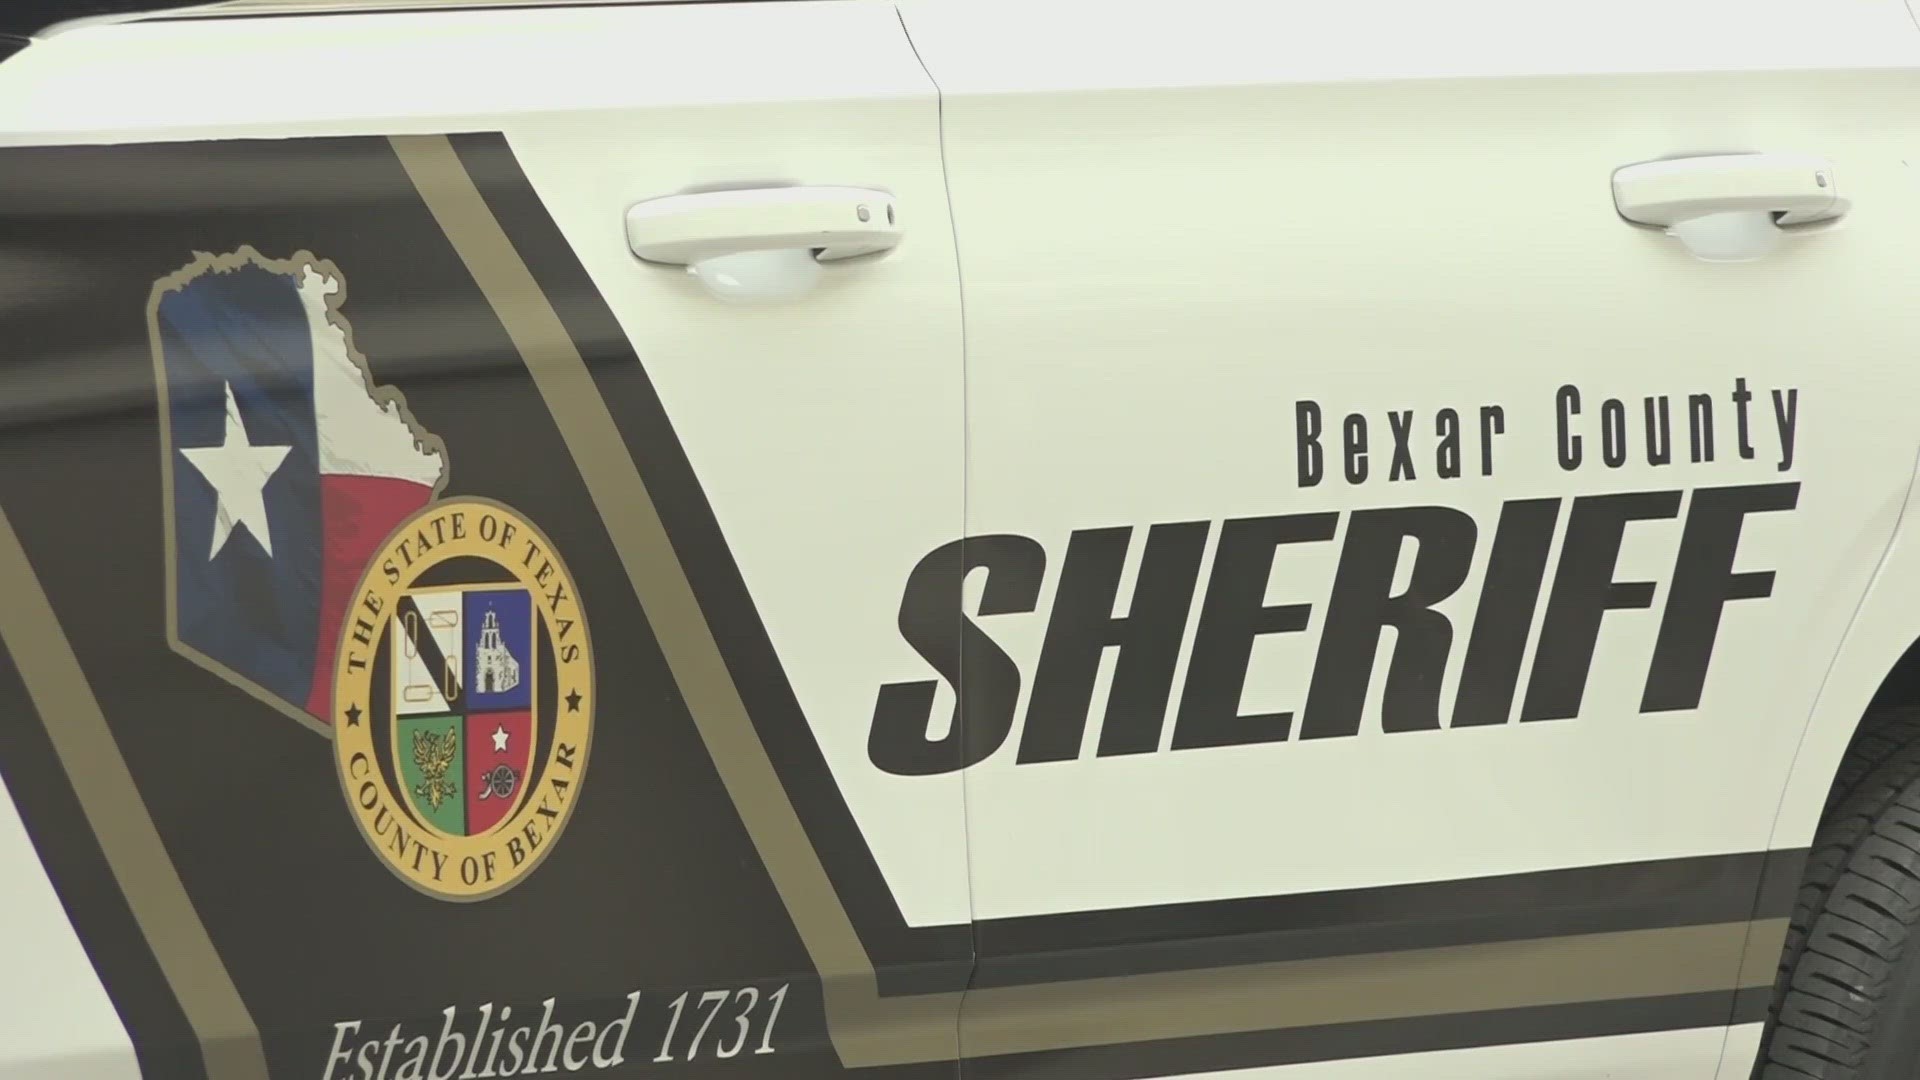 A proposed bill would require Bexar County to have nearly two deputies per 1,000 residents in unincorporated Bexar County.